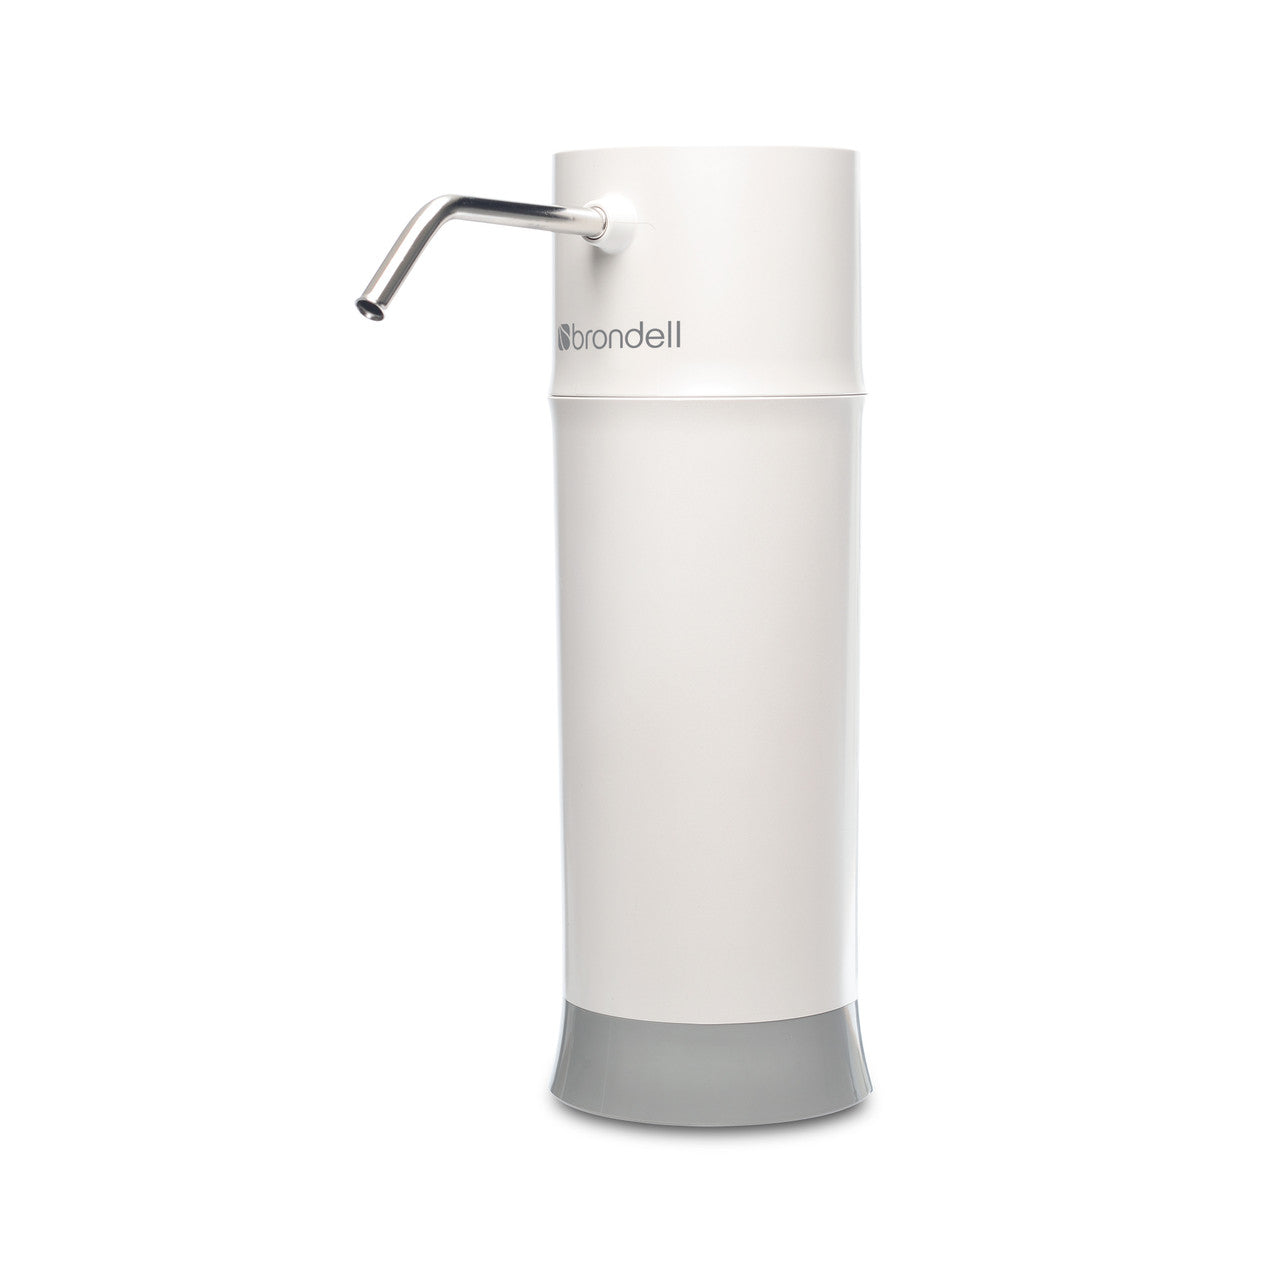 H2O+ Pearl Countertop Water Filter System